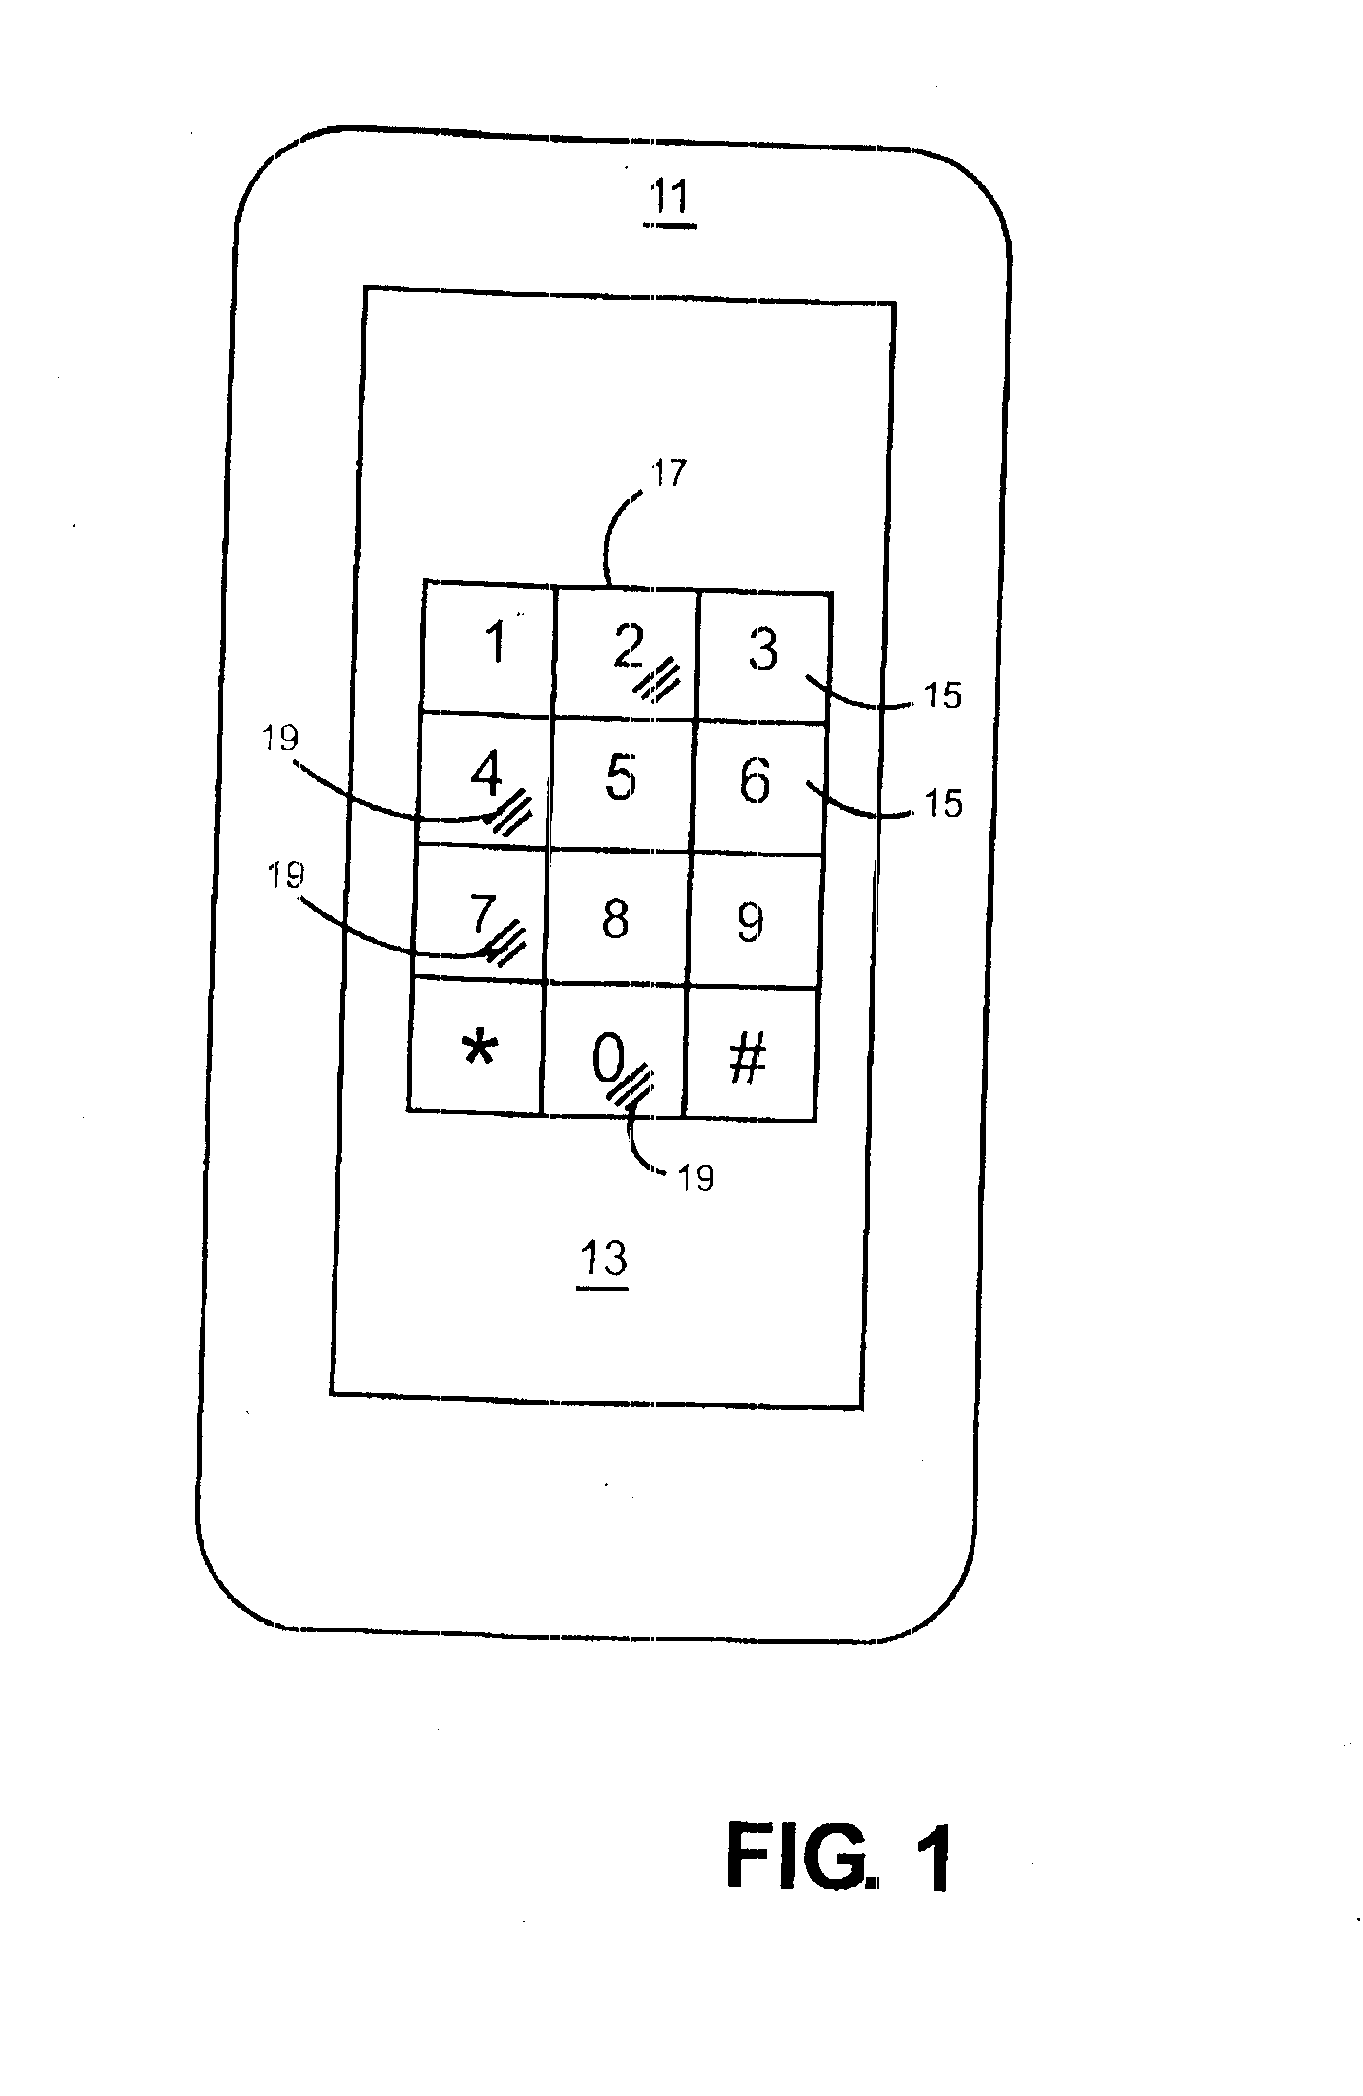 Preventing the detection and theft of user entry alphanumeric security codes on computer touch screen keypads